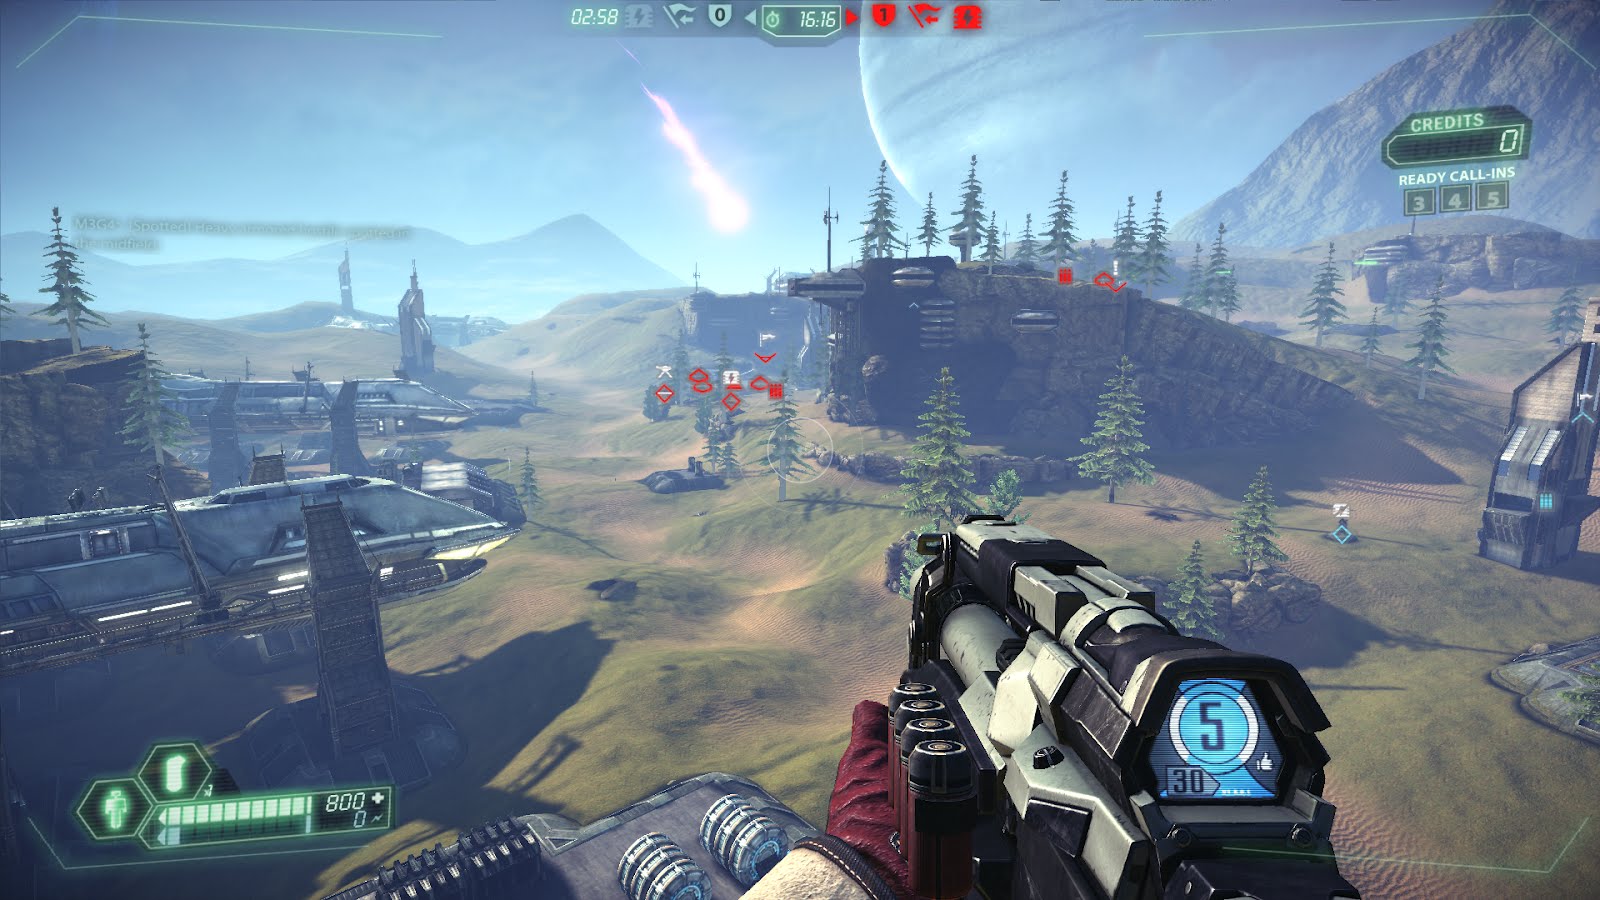 tribes-ascend